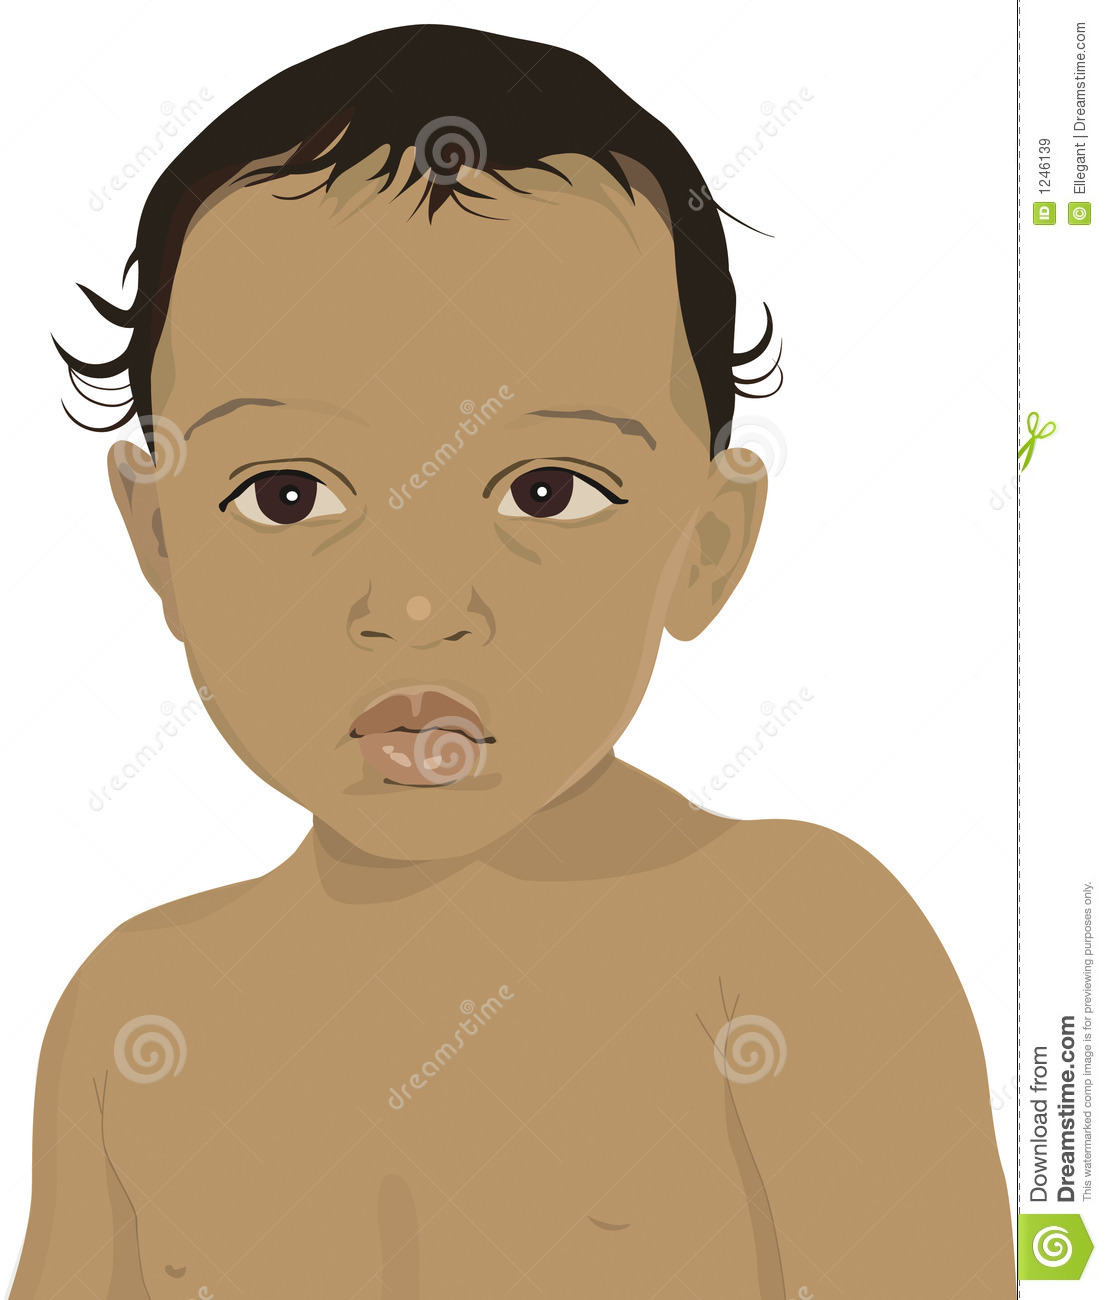 Royalty Free Stock Images  Black Baby  Image  1246139